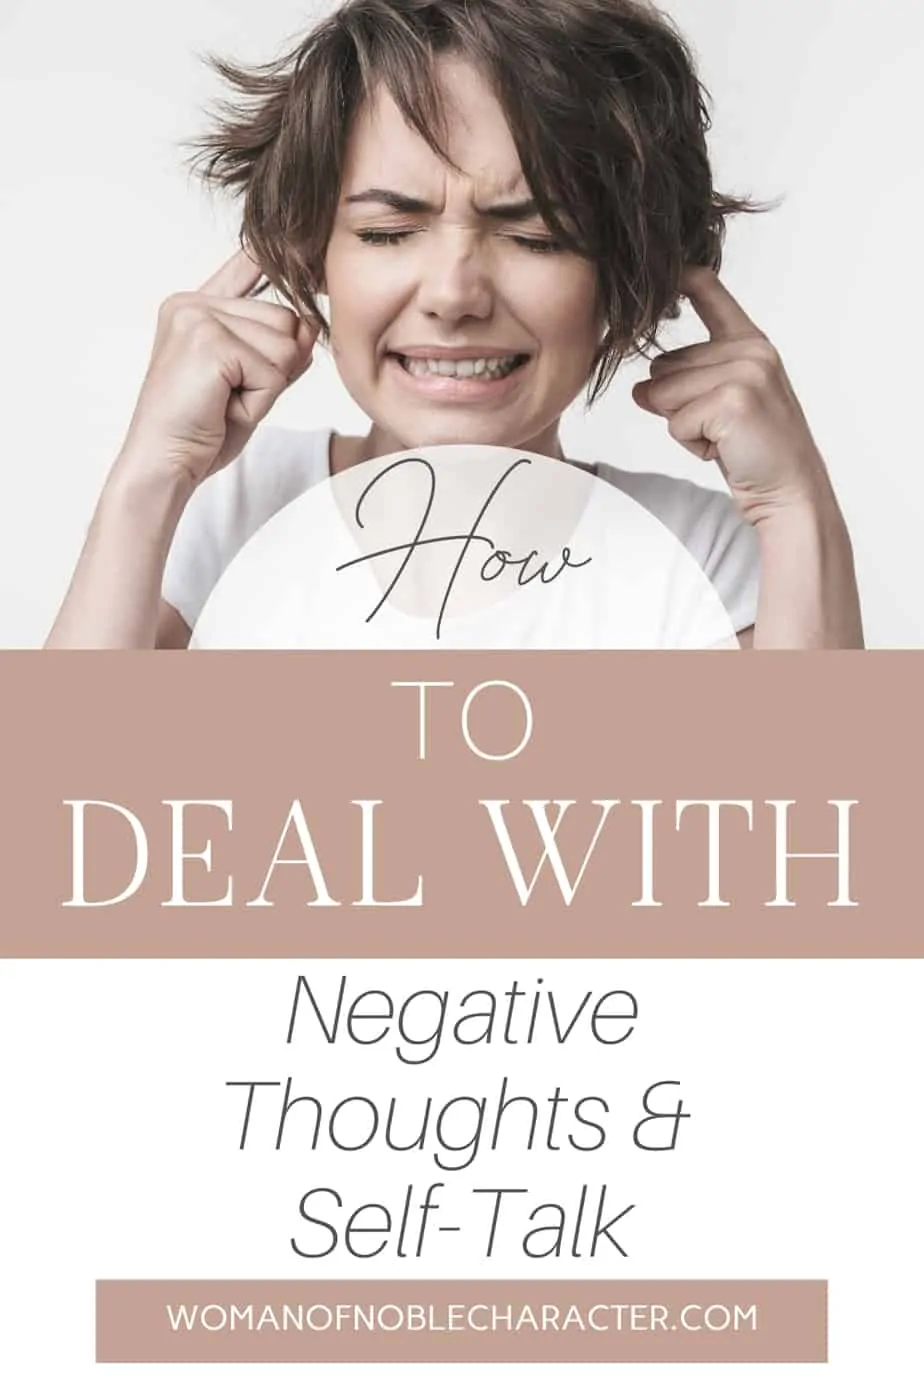 An image of a woman with an anxious face and her fingers in her ears and a text overlay that says How to Deal with Negative Thoughts and Self-Talk